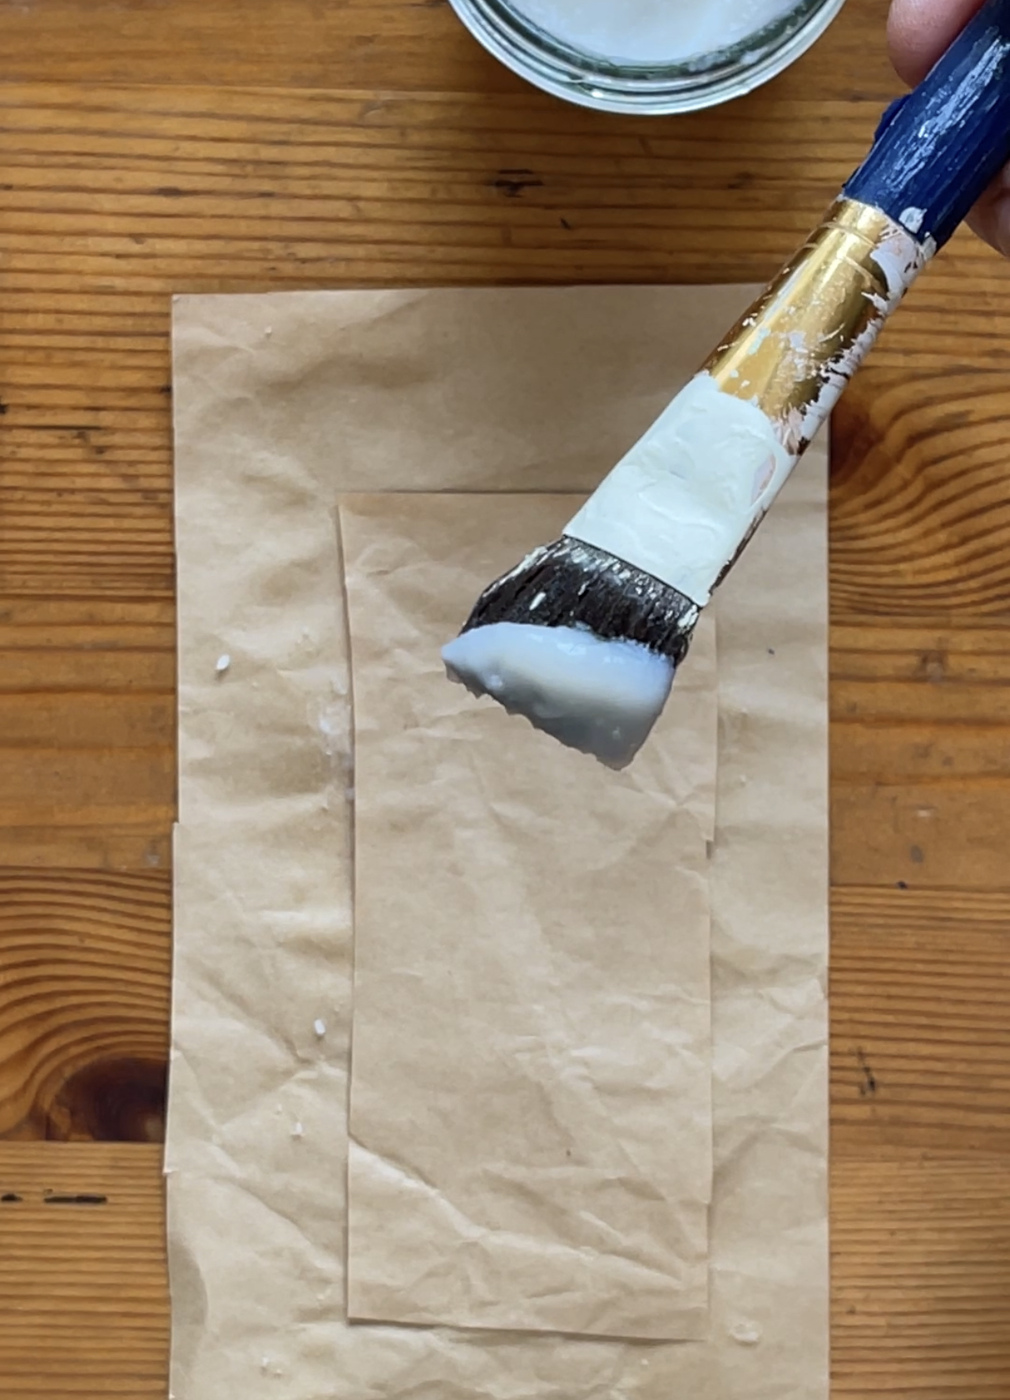 A paint brush dipped in rice glue is shown above a strip of brown paper sitting on a larger piece of brown paper.